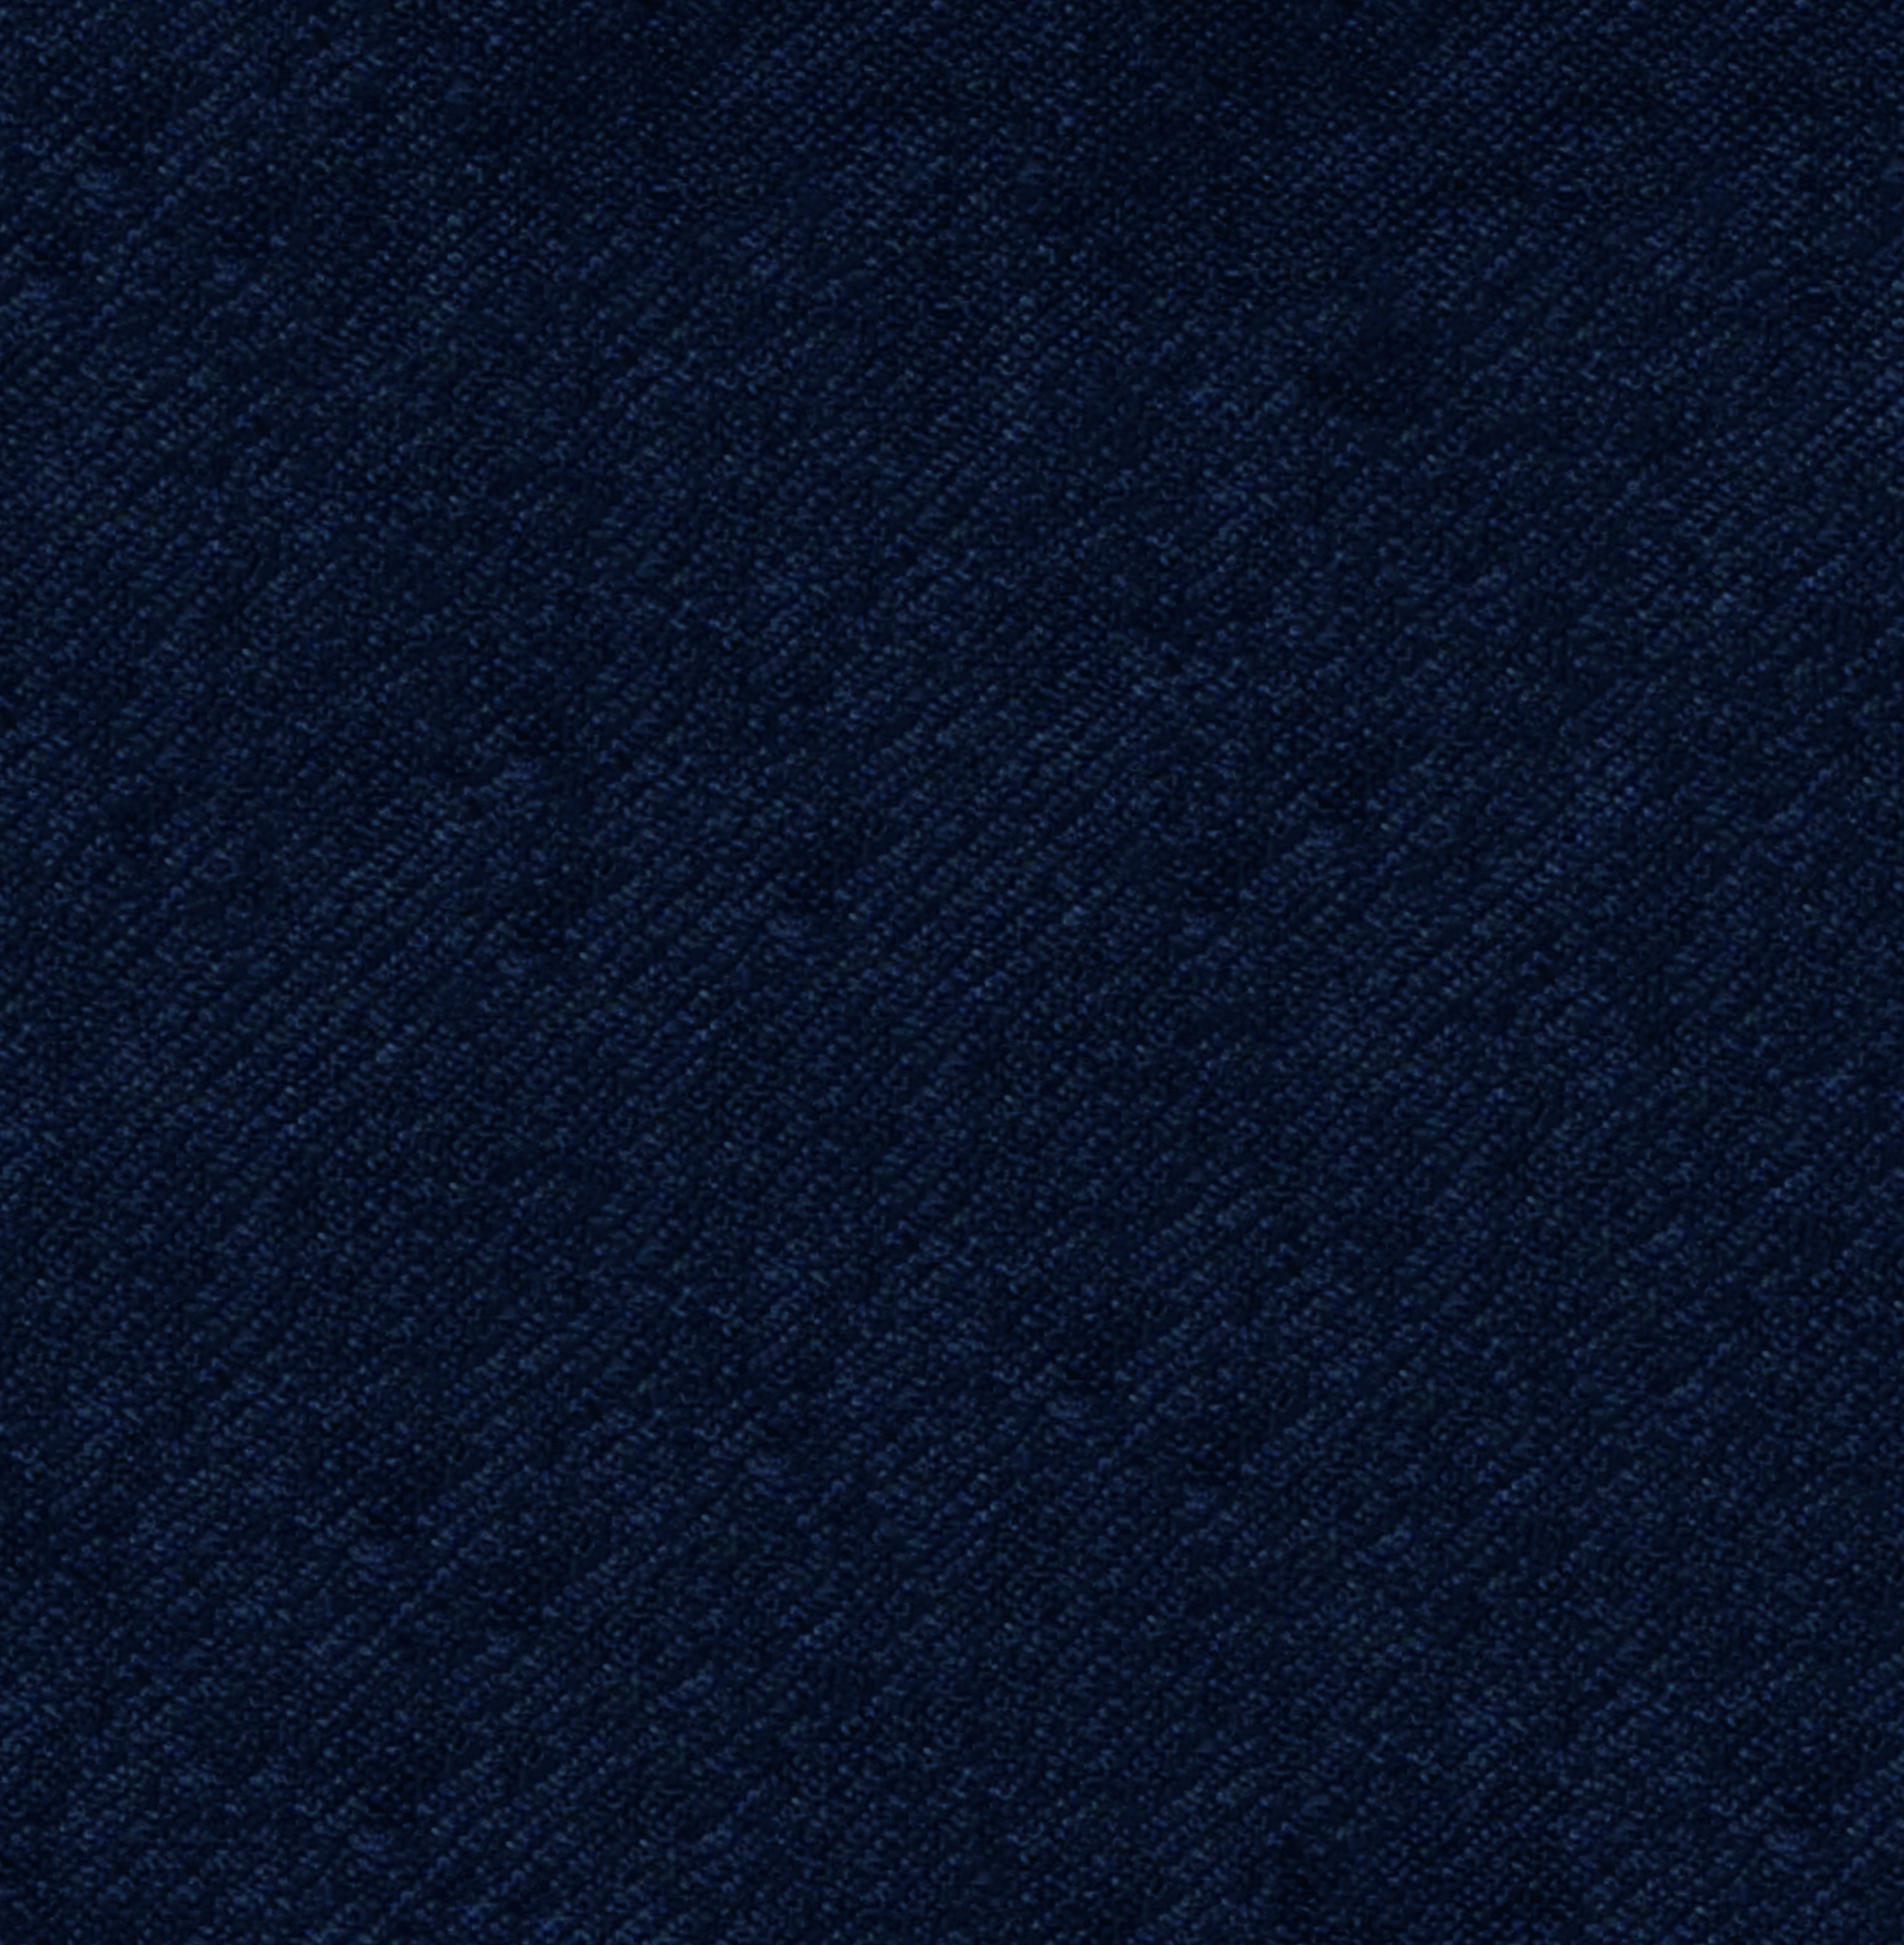 Buy tailor made shirts online - Luxurious Pure New Wool - French Navy with lining